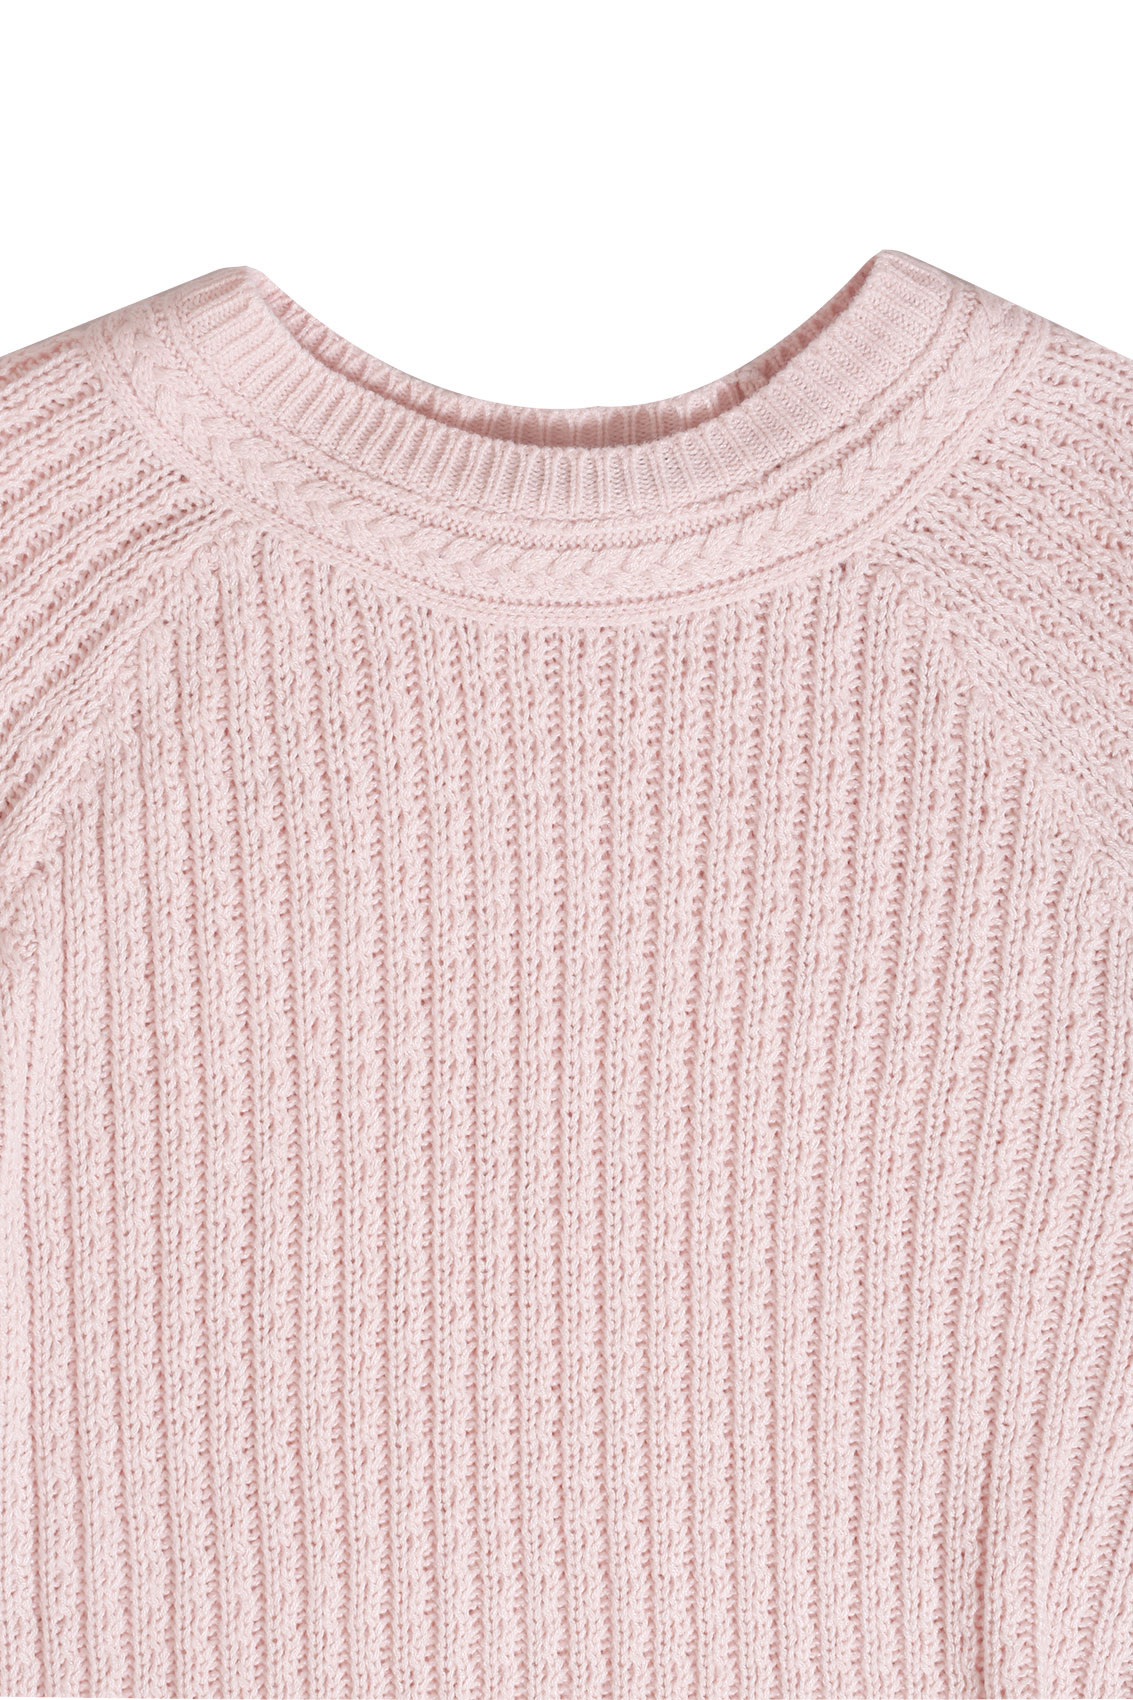 Pale Pink Cable Knit Long Sleeve Jumper Plus Size 16 to 32